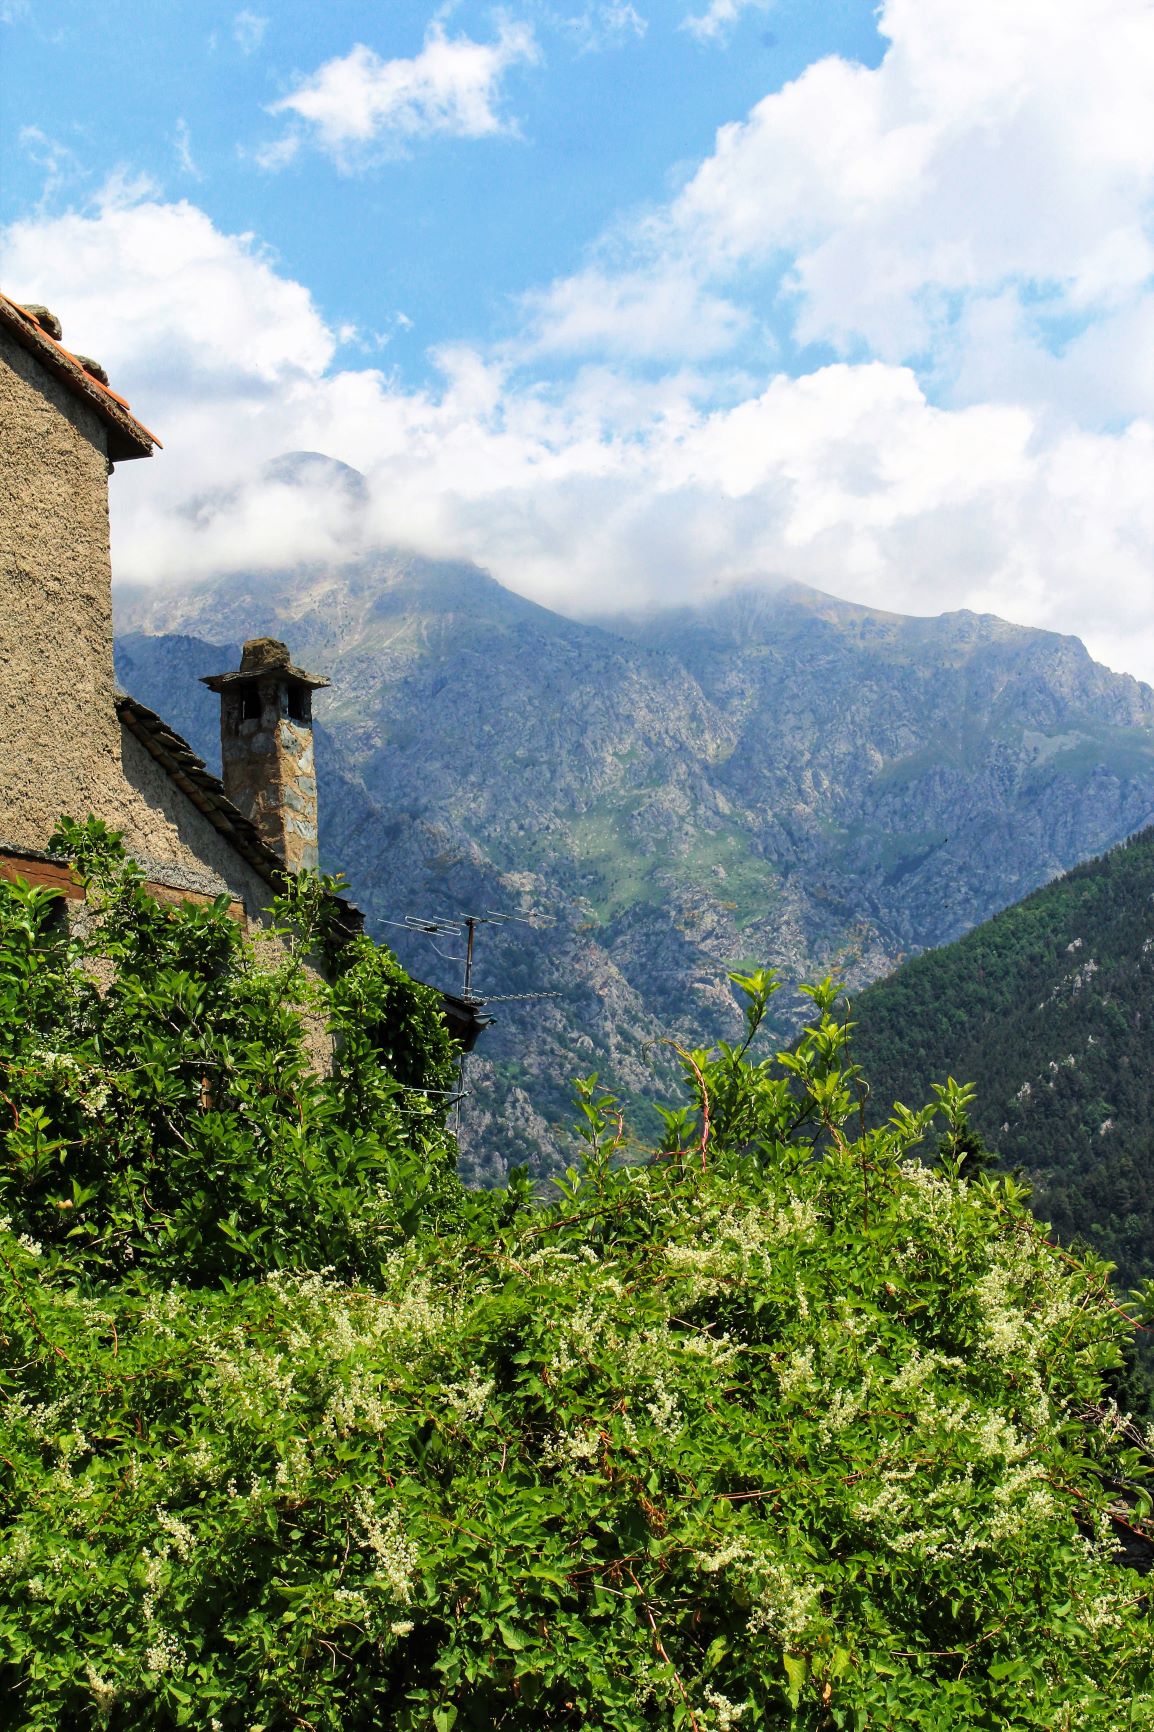 Photos to inspire you to visit Queralbs in Spain www.DreamPlanExperience.com